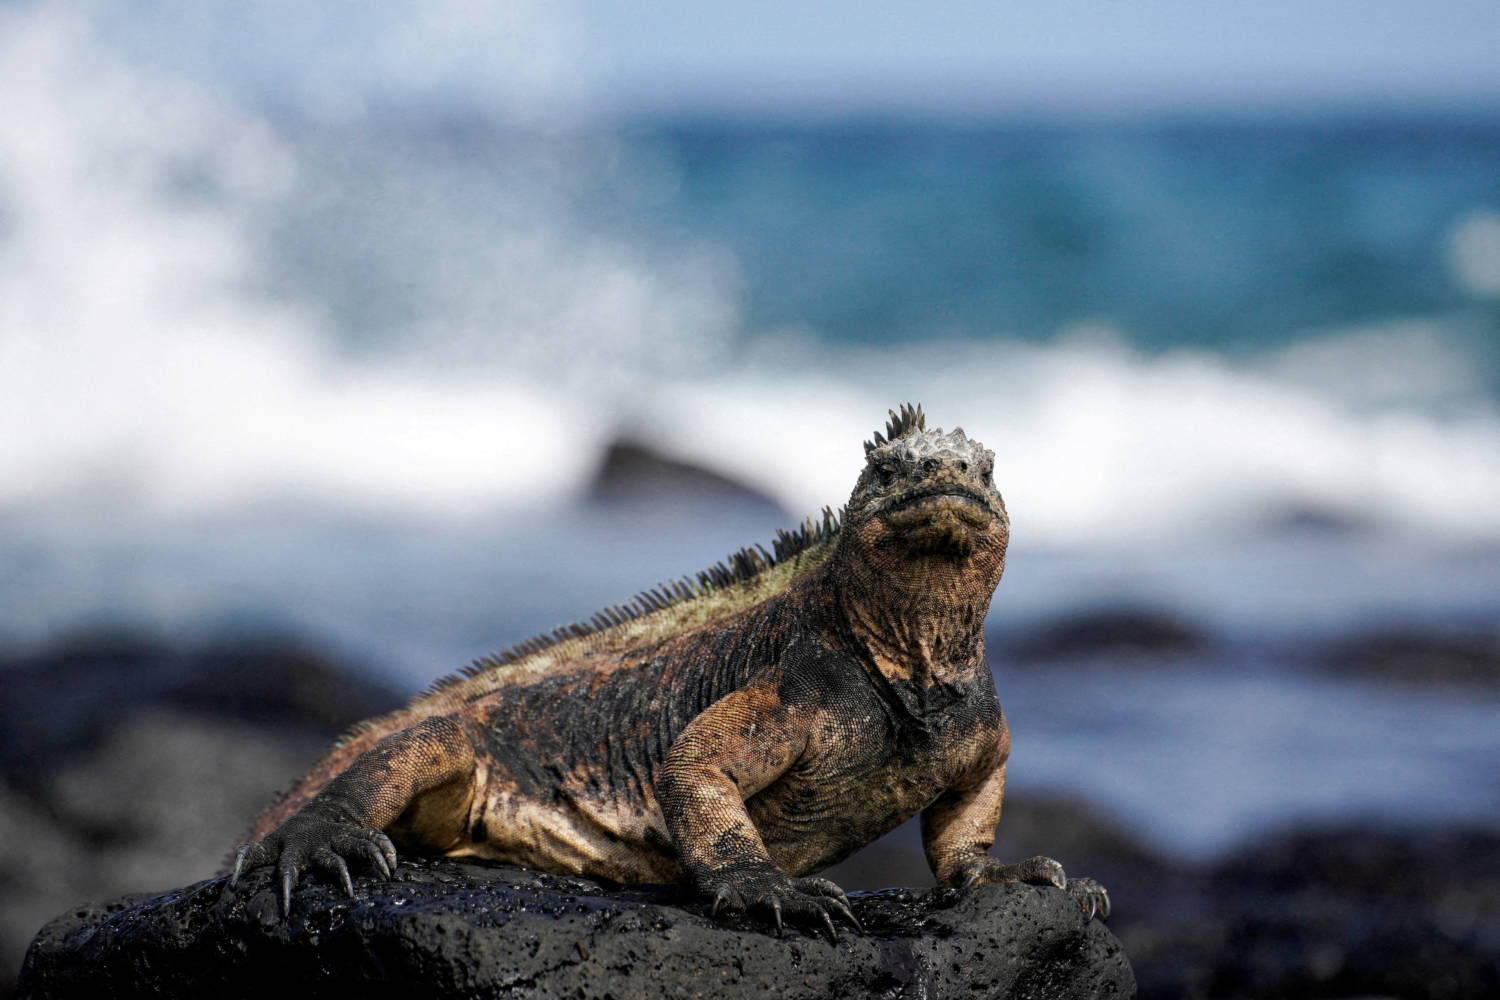 File Photo: A Marine Iguana Sits On A Rock In The Galapagos Islands